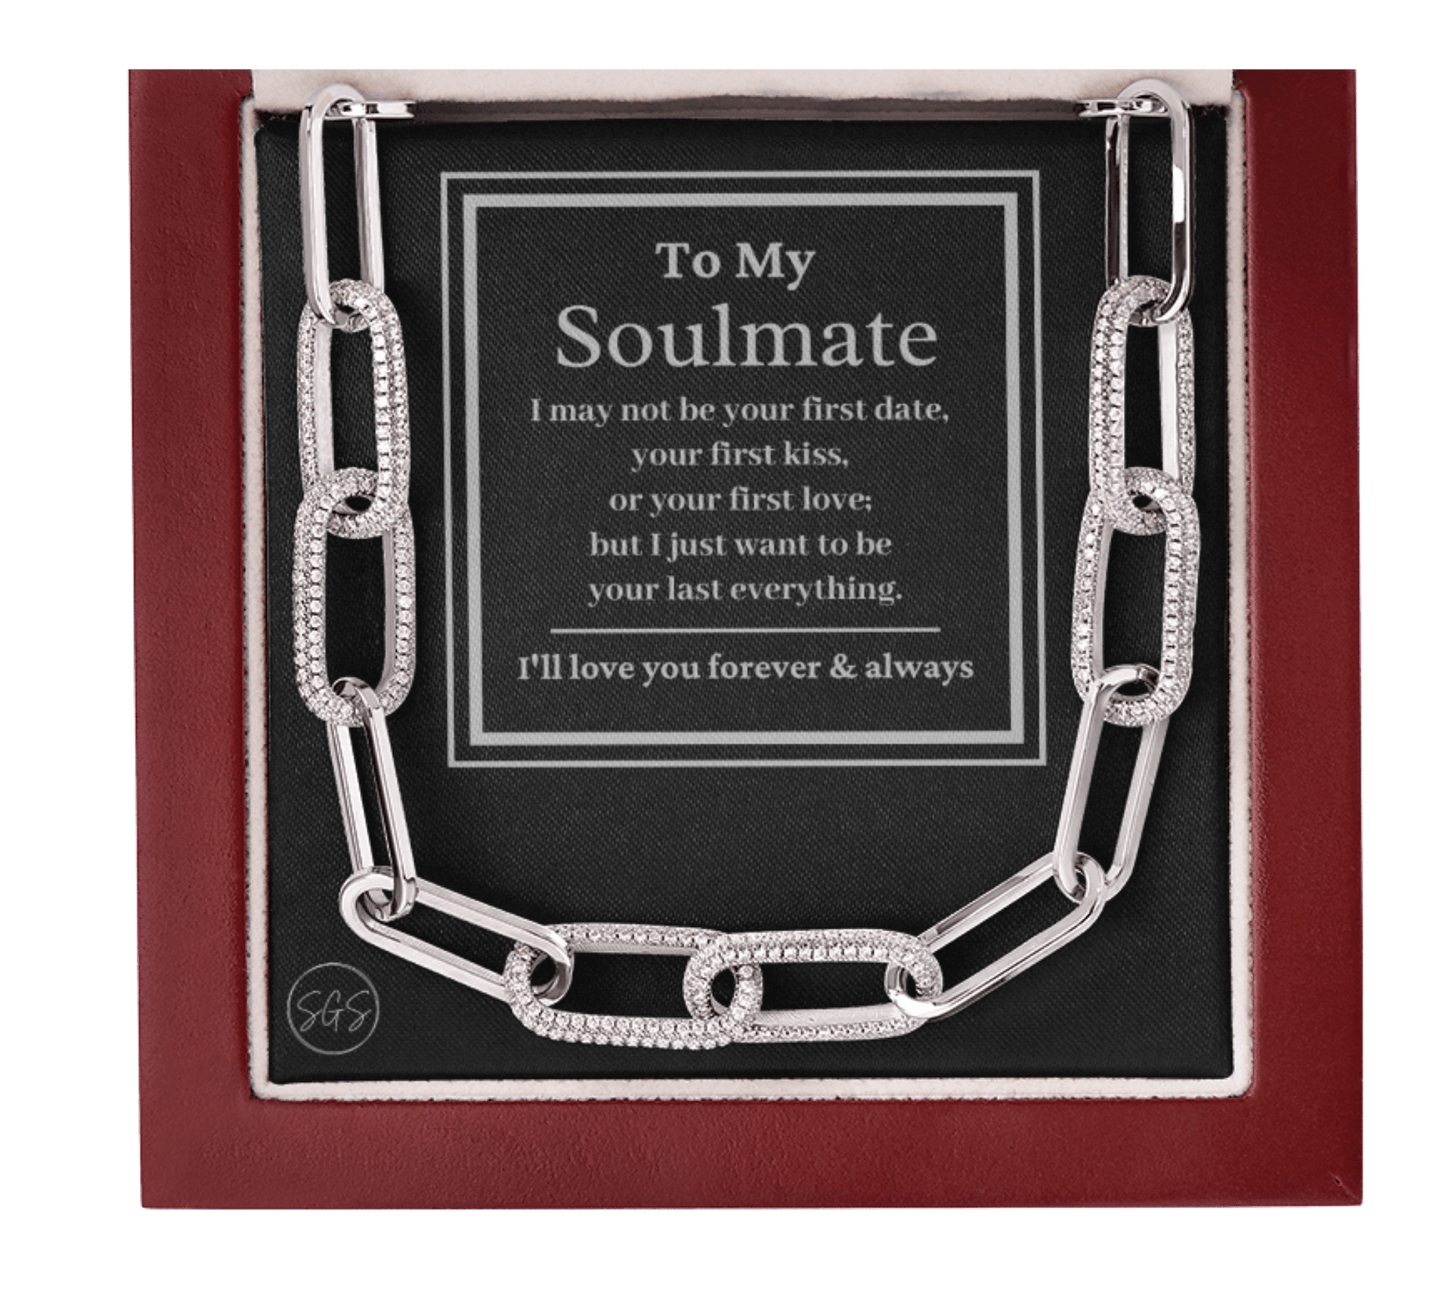 Soulmate - Seven Hundred Reasons Necklace | Silver Soulmate Necklace for Women, Anniversary Gift for Girlfriend, Soulmate Jewelry for Wife